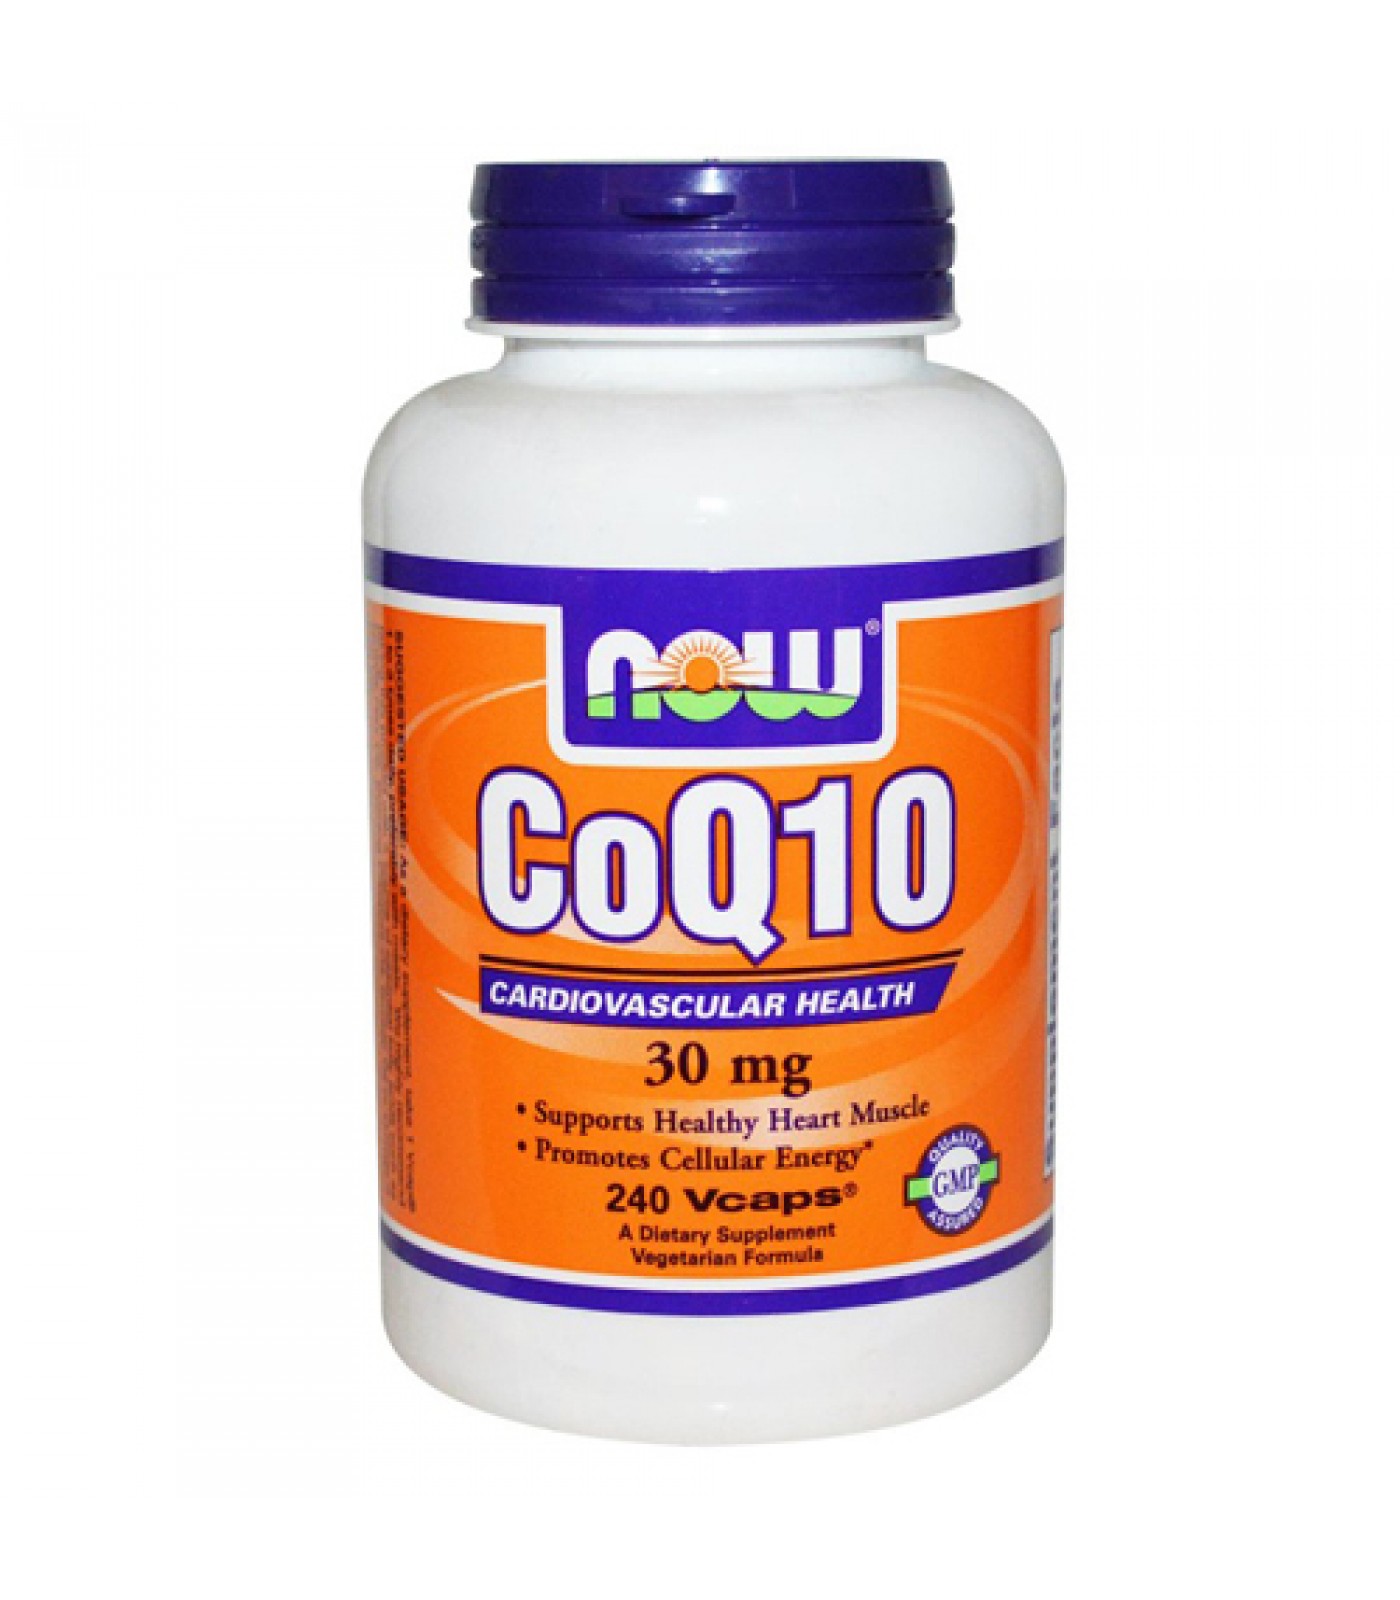 NOW - CoQ10 30mg. / 240 VCaps.